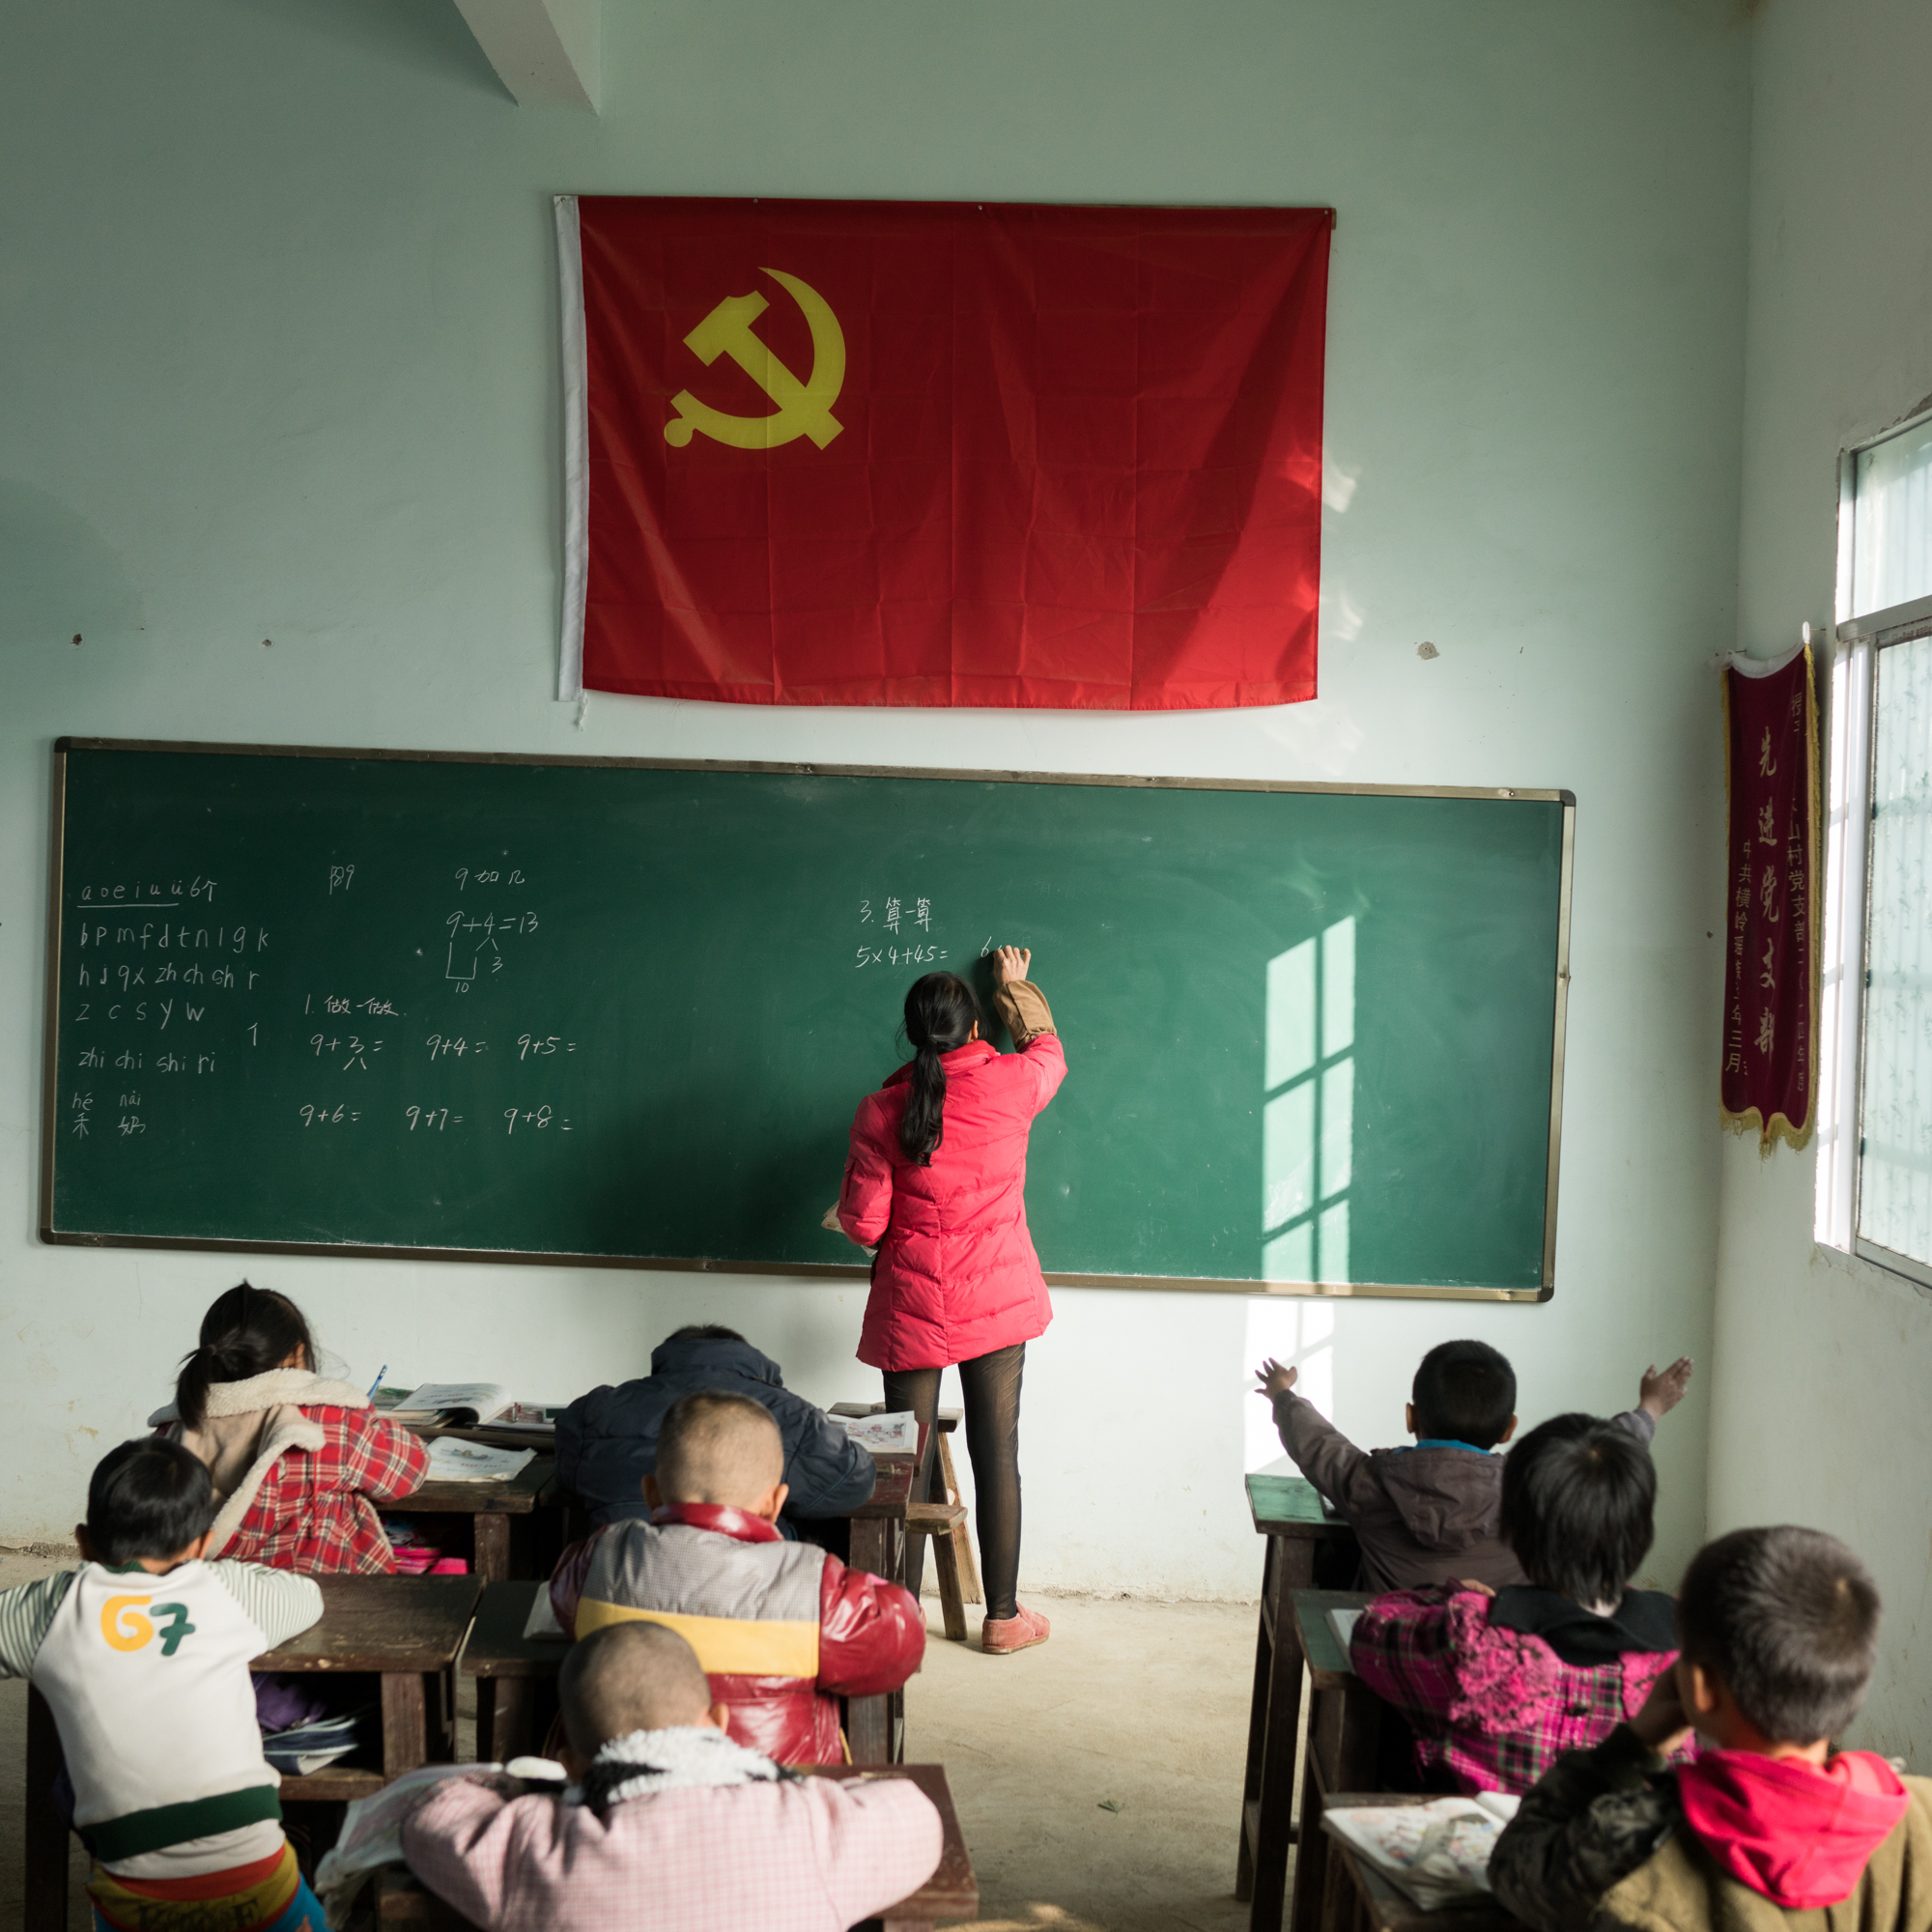 Children aged 6 to 10 sit under the Chinese Communist Party flag, learning math, in a single-room schoolhouse in Maple Wood Mountain. Just behind the school is a pit with 31 corpses, including the three children of Zhou Qun. The children were tossed into the limestone pit alongside adults who had been clubbed on the head. Everyone died over the next seven days in the pit except for Zhou. “I think of how the children died in my arms. . .” she told us, breaking down.